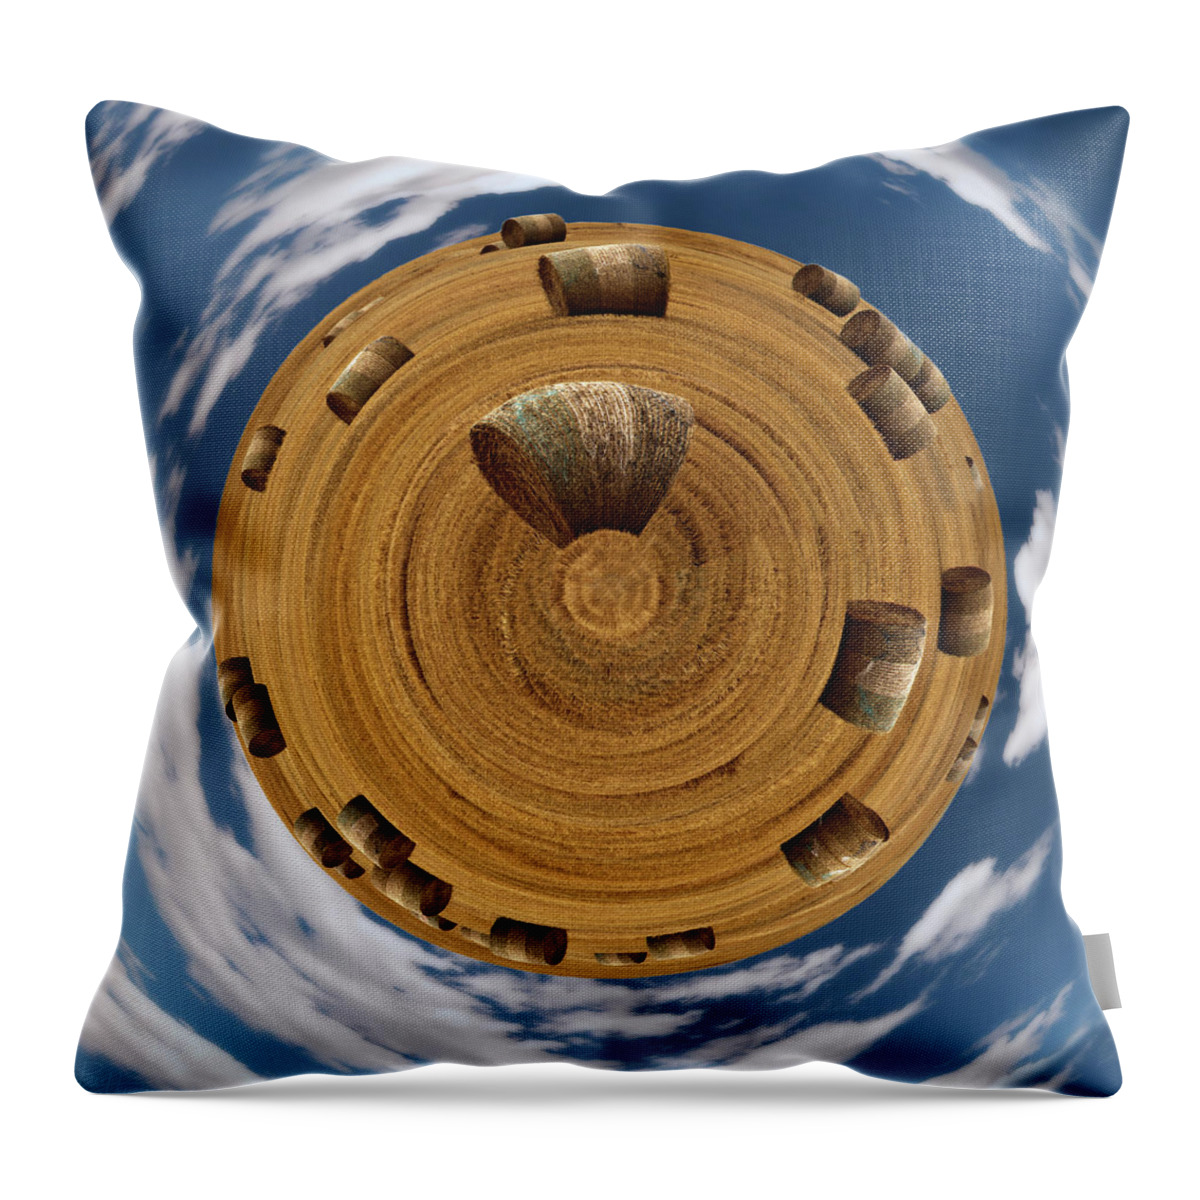 Hay Little Planet Planet Farm Bales Round Wheat Straw Circular Haybale Stubble Cloud Sky Nd North Dakota Farm Farming Ag Agriculture Cows Feed Harvest Throw Pillow featuring the photograph Hay Planet by Peter Herman